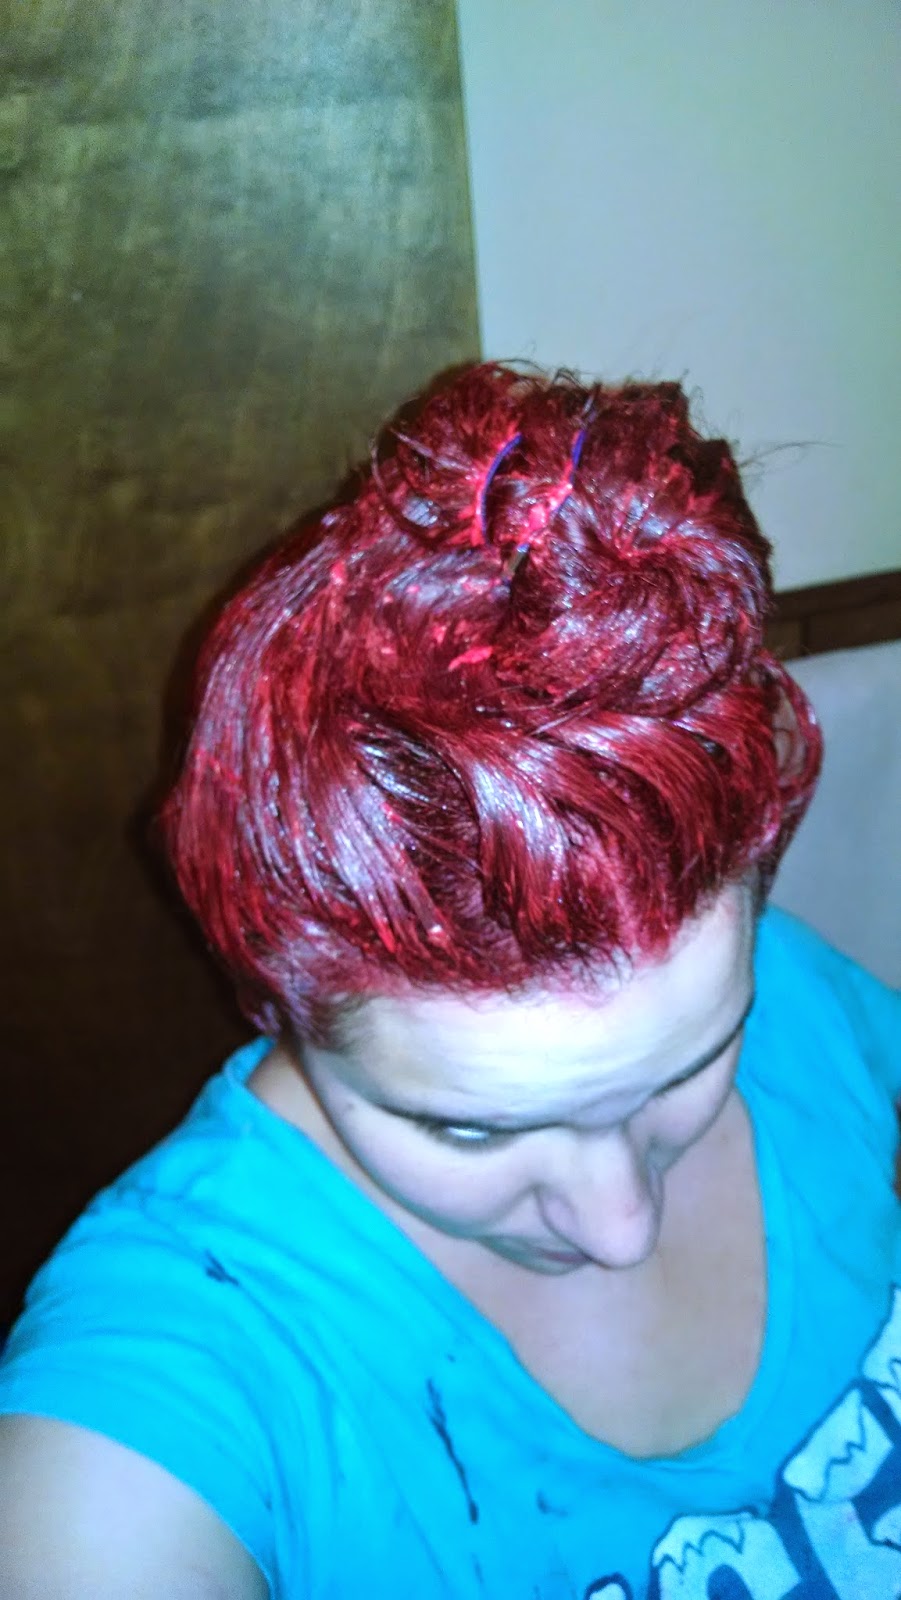 Theresa M Jones How To Dye Your Hair Two Tones Red On Top And Black Underneath